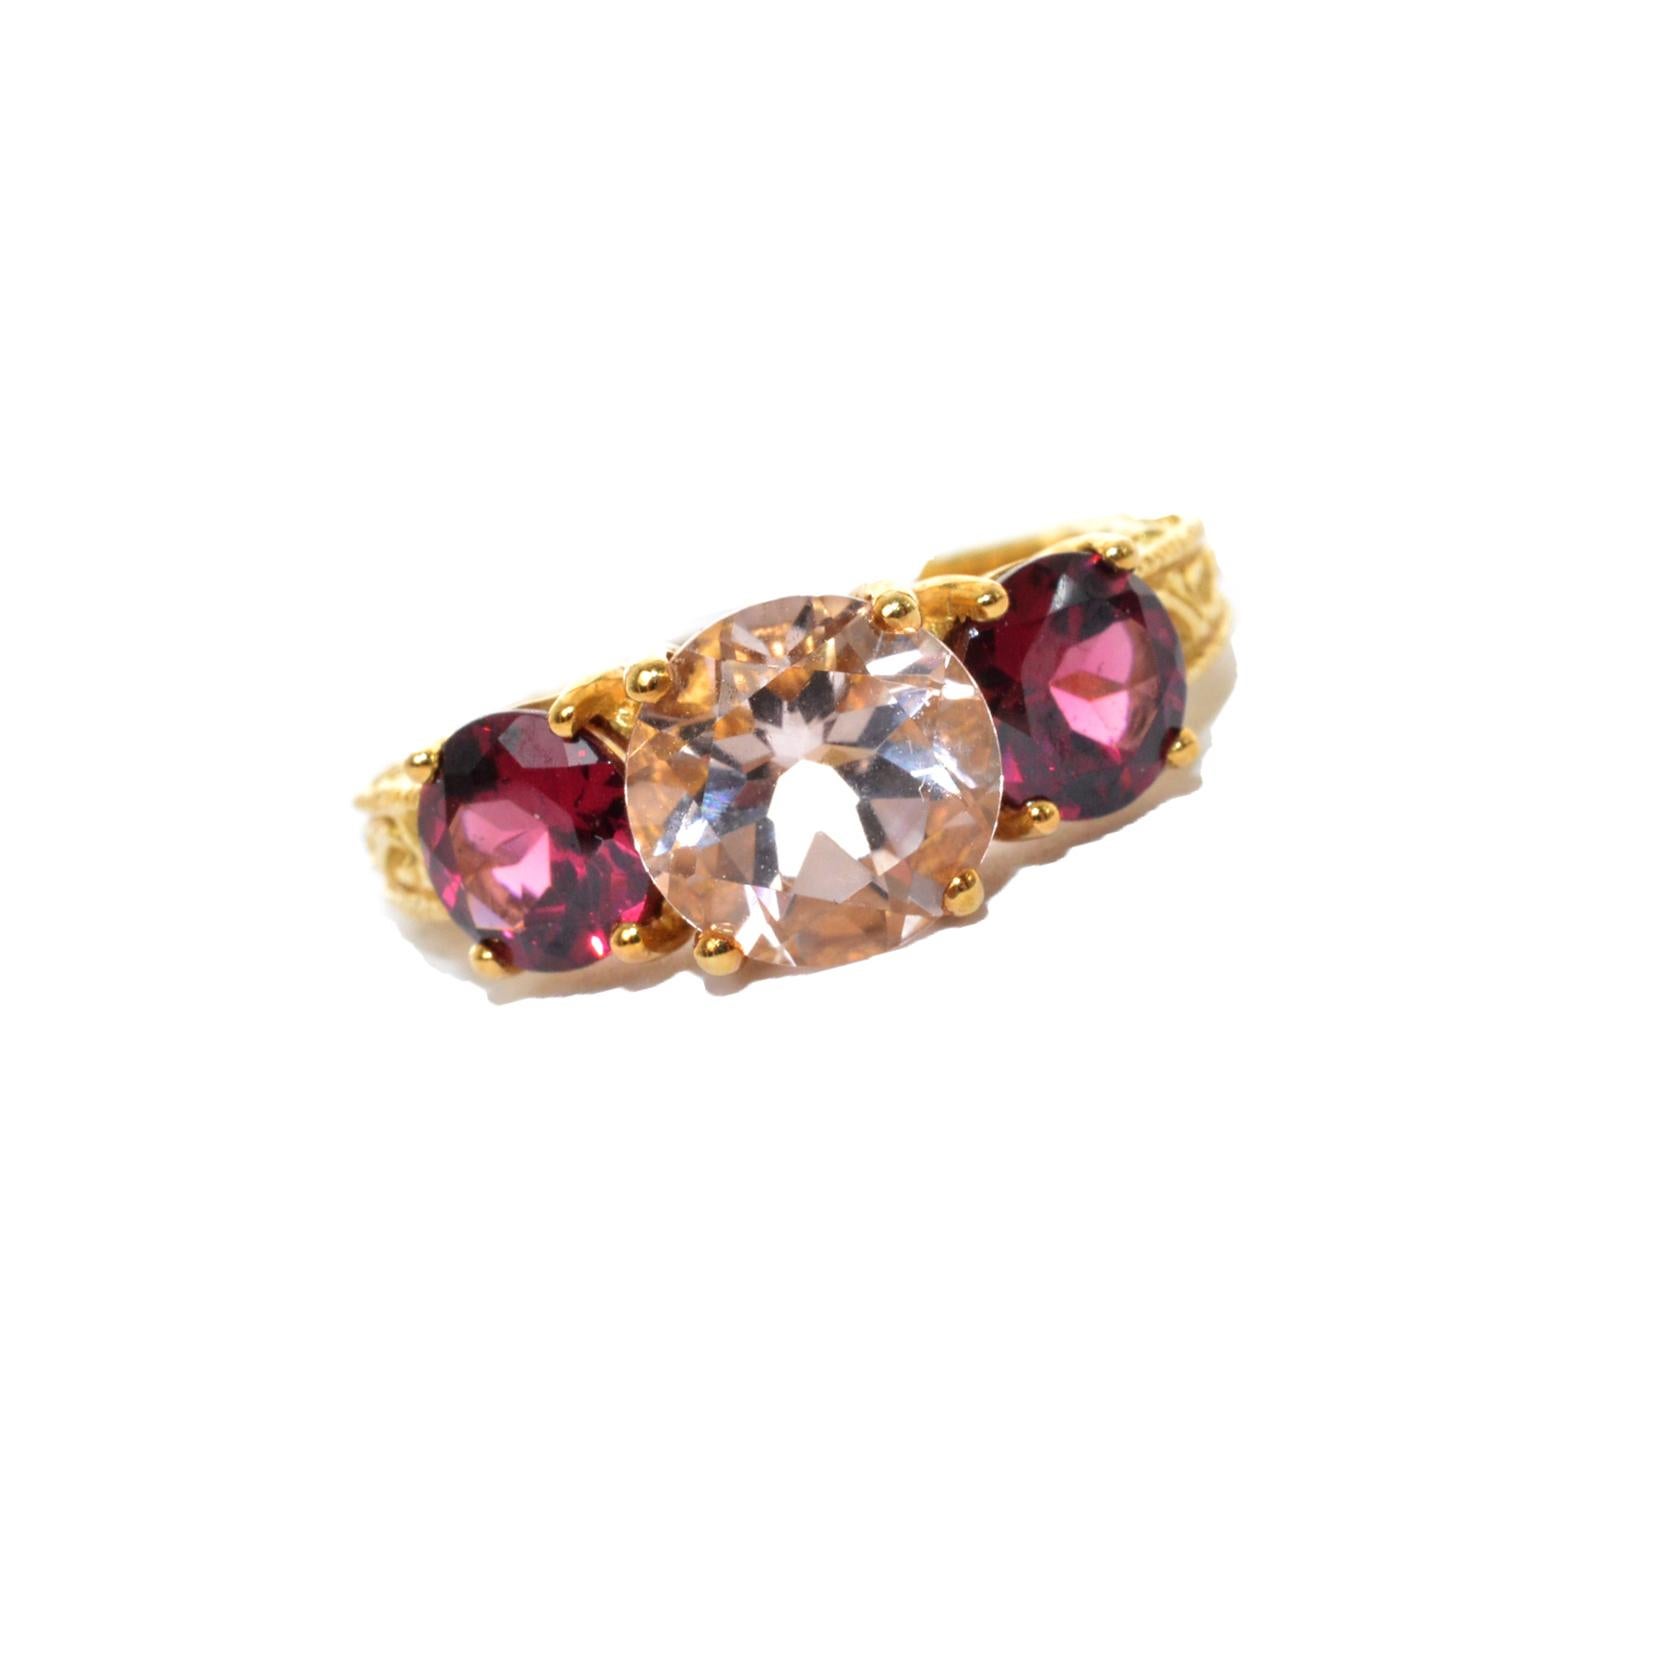 Sunita Nahata presents a collection of bold yet dainty cocktail ring! The morganite in the center is in classic round cut while the rhodolite stone on either side is in round cut. These rings are made in yellow gold and present a classic yet elegant